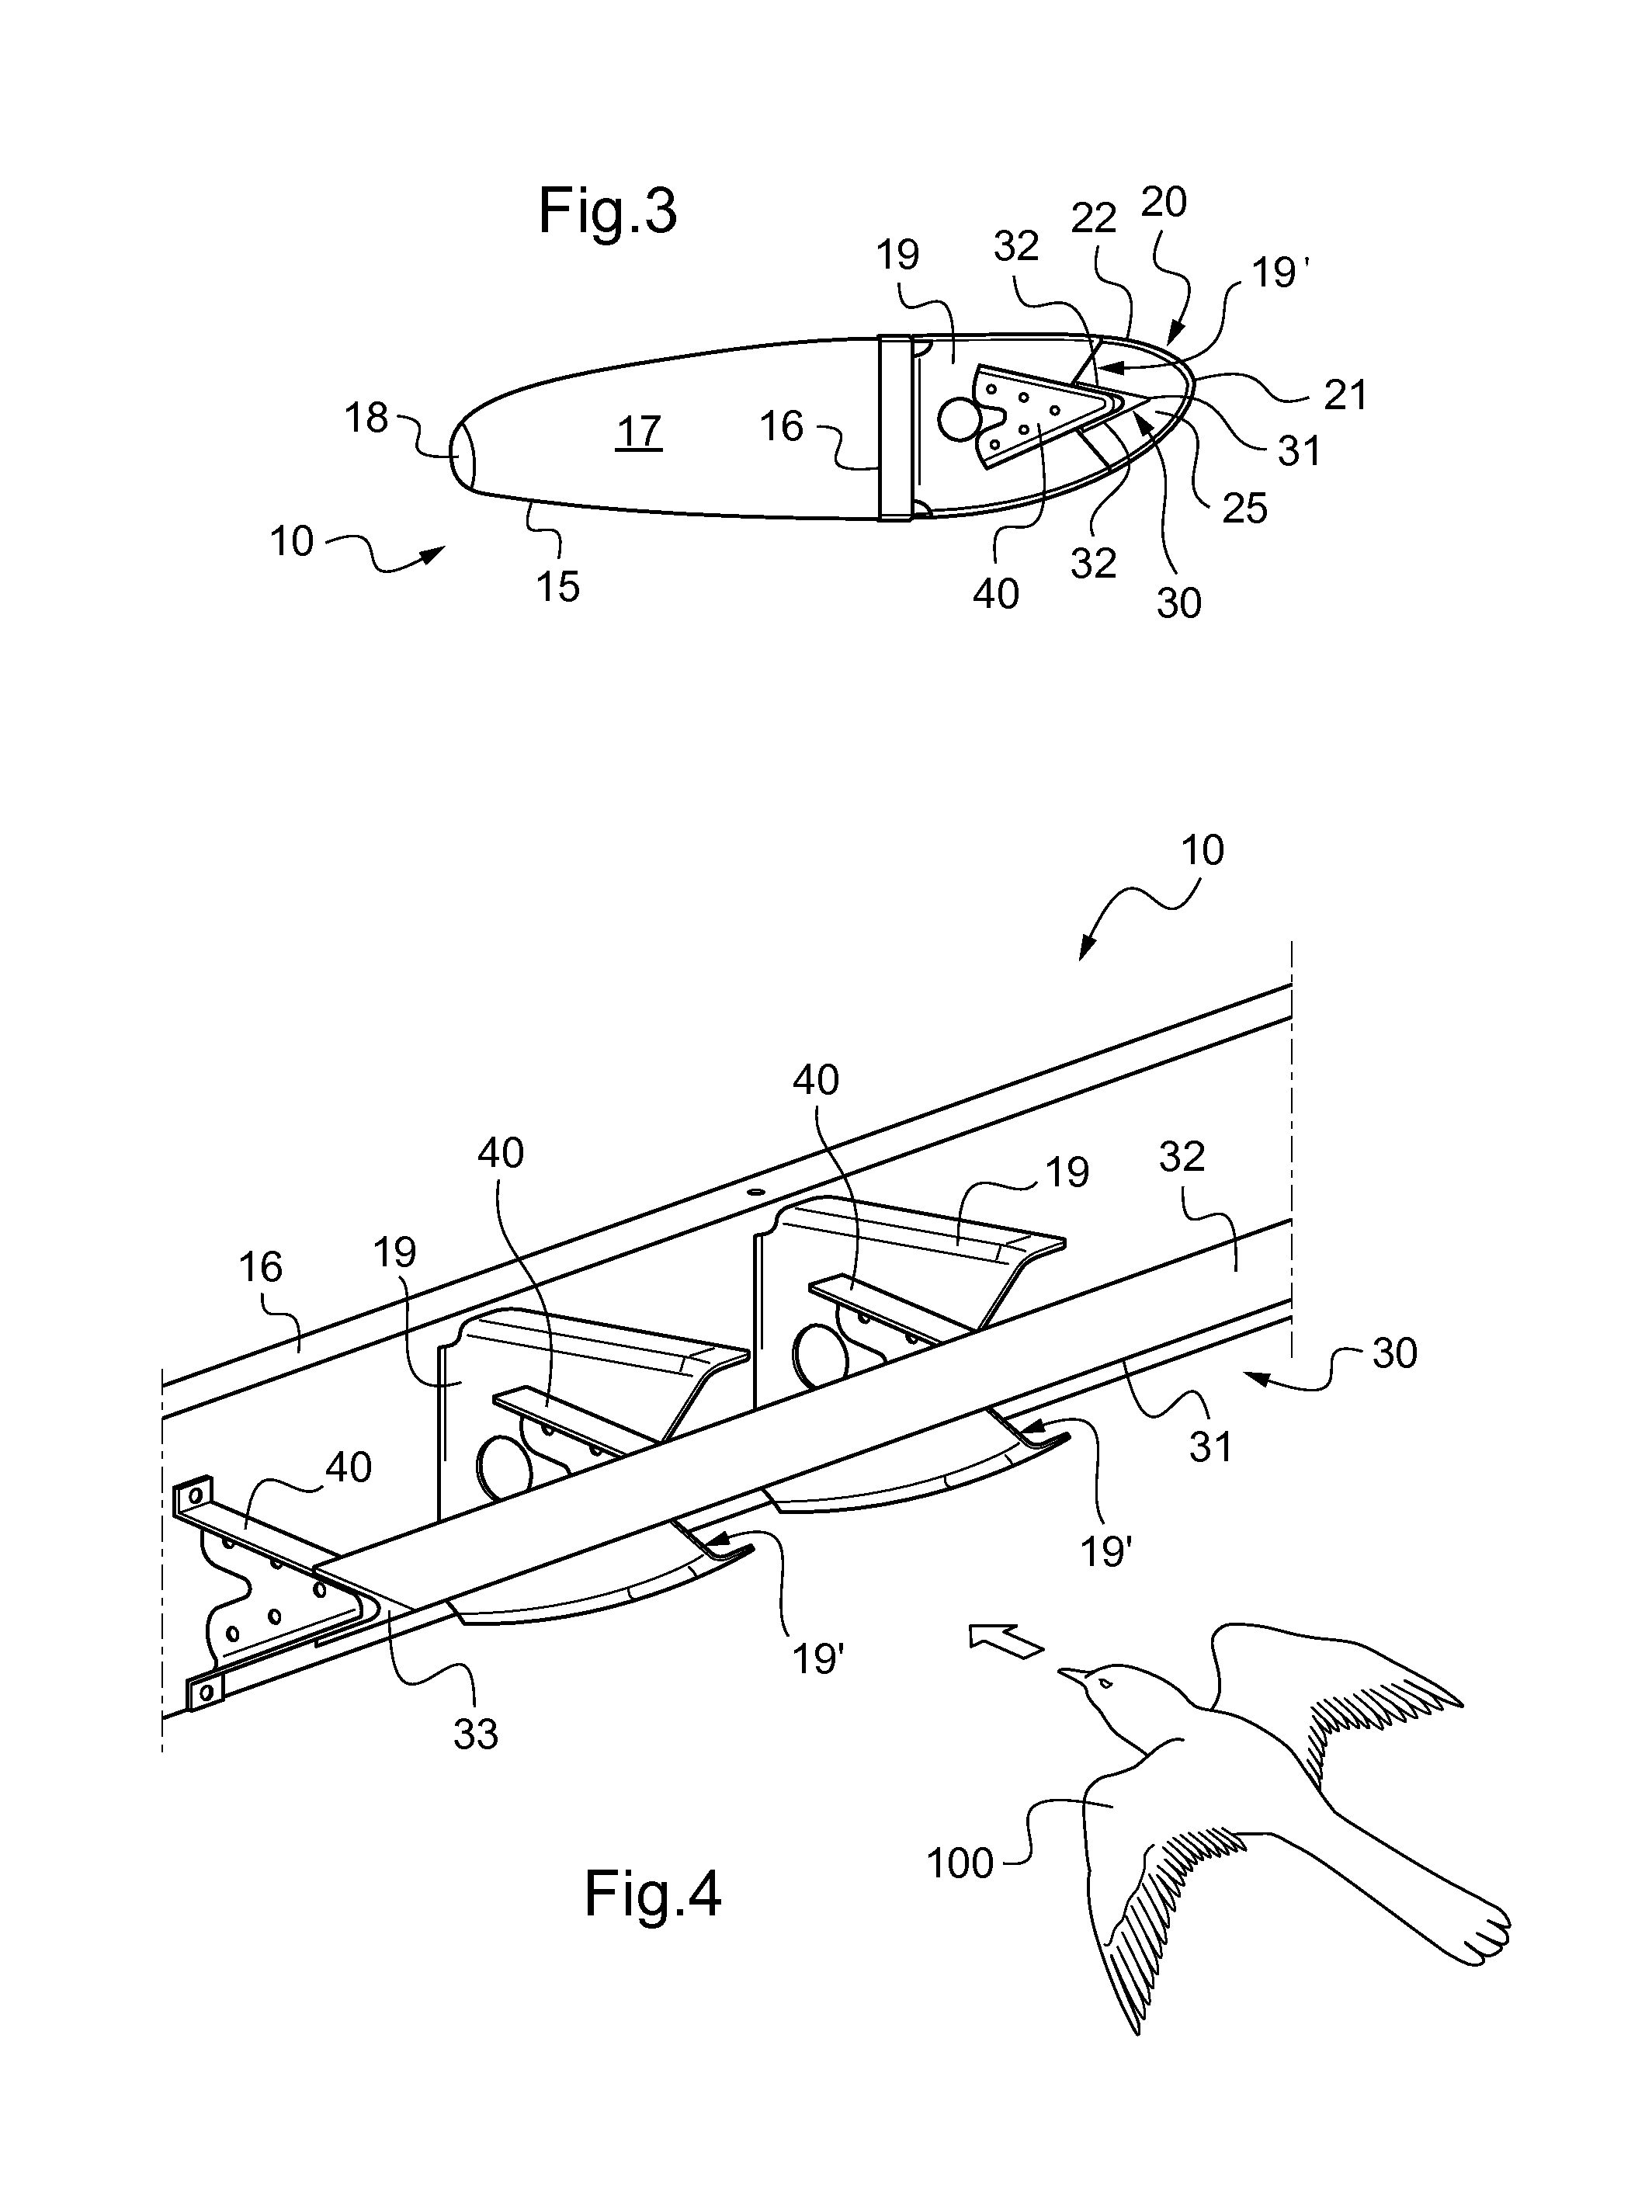 Aircraft airfoil, and an aircraft provided with such an airfoil